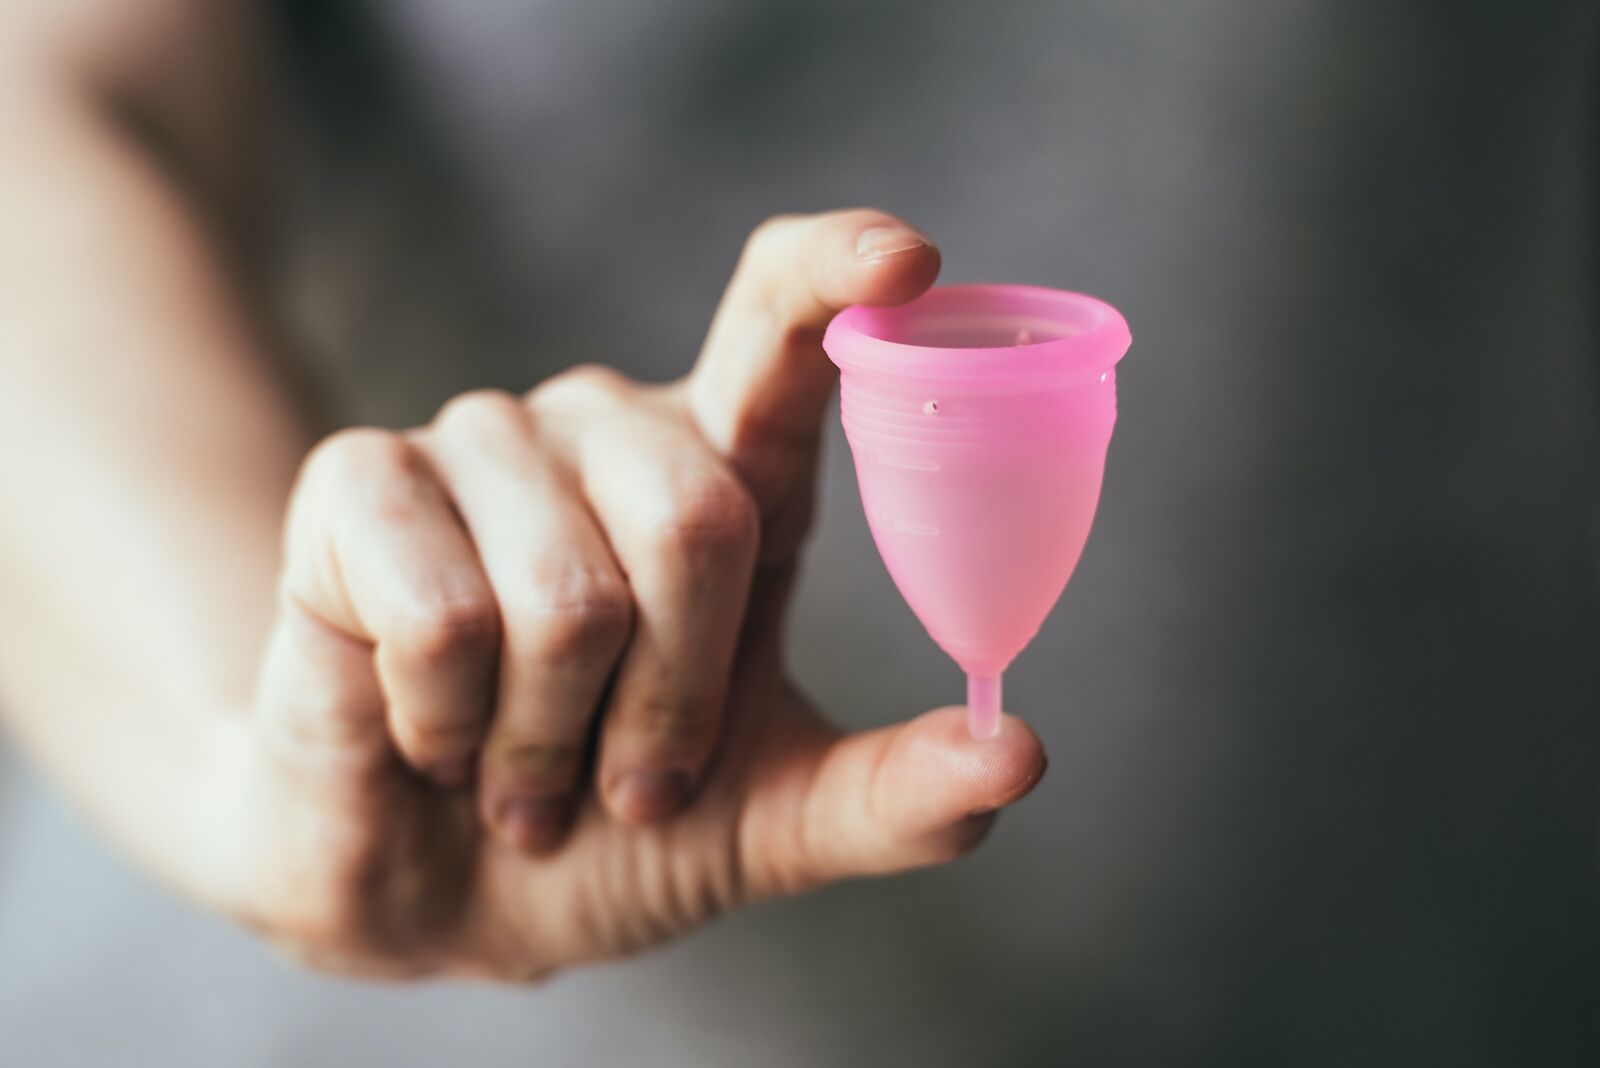 young woman holding a pink menstrual cup between her thumb and forefinger